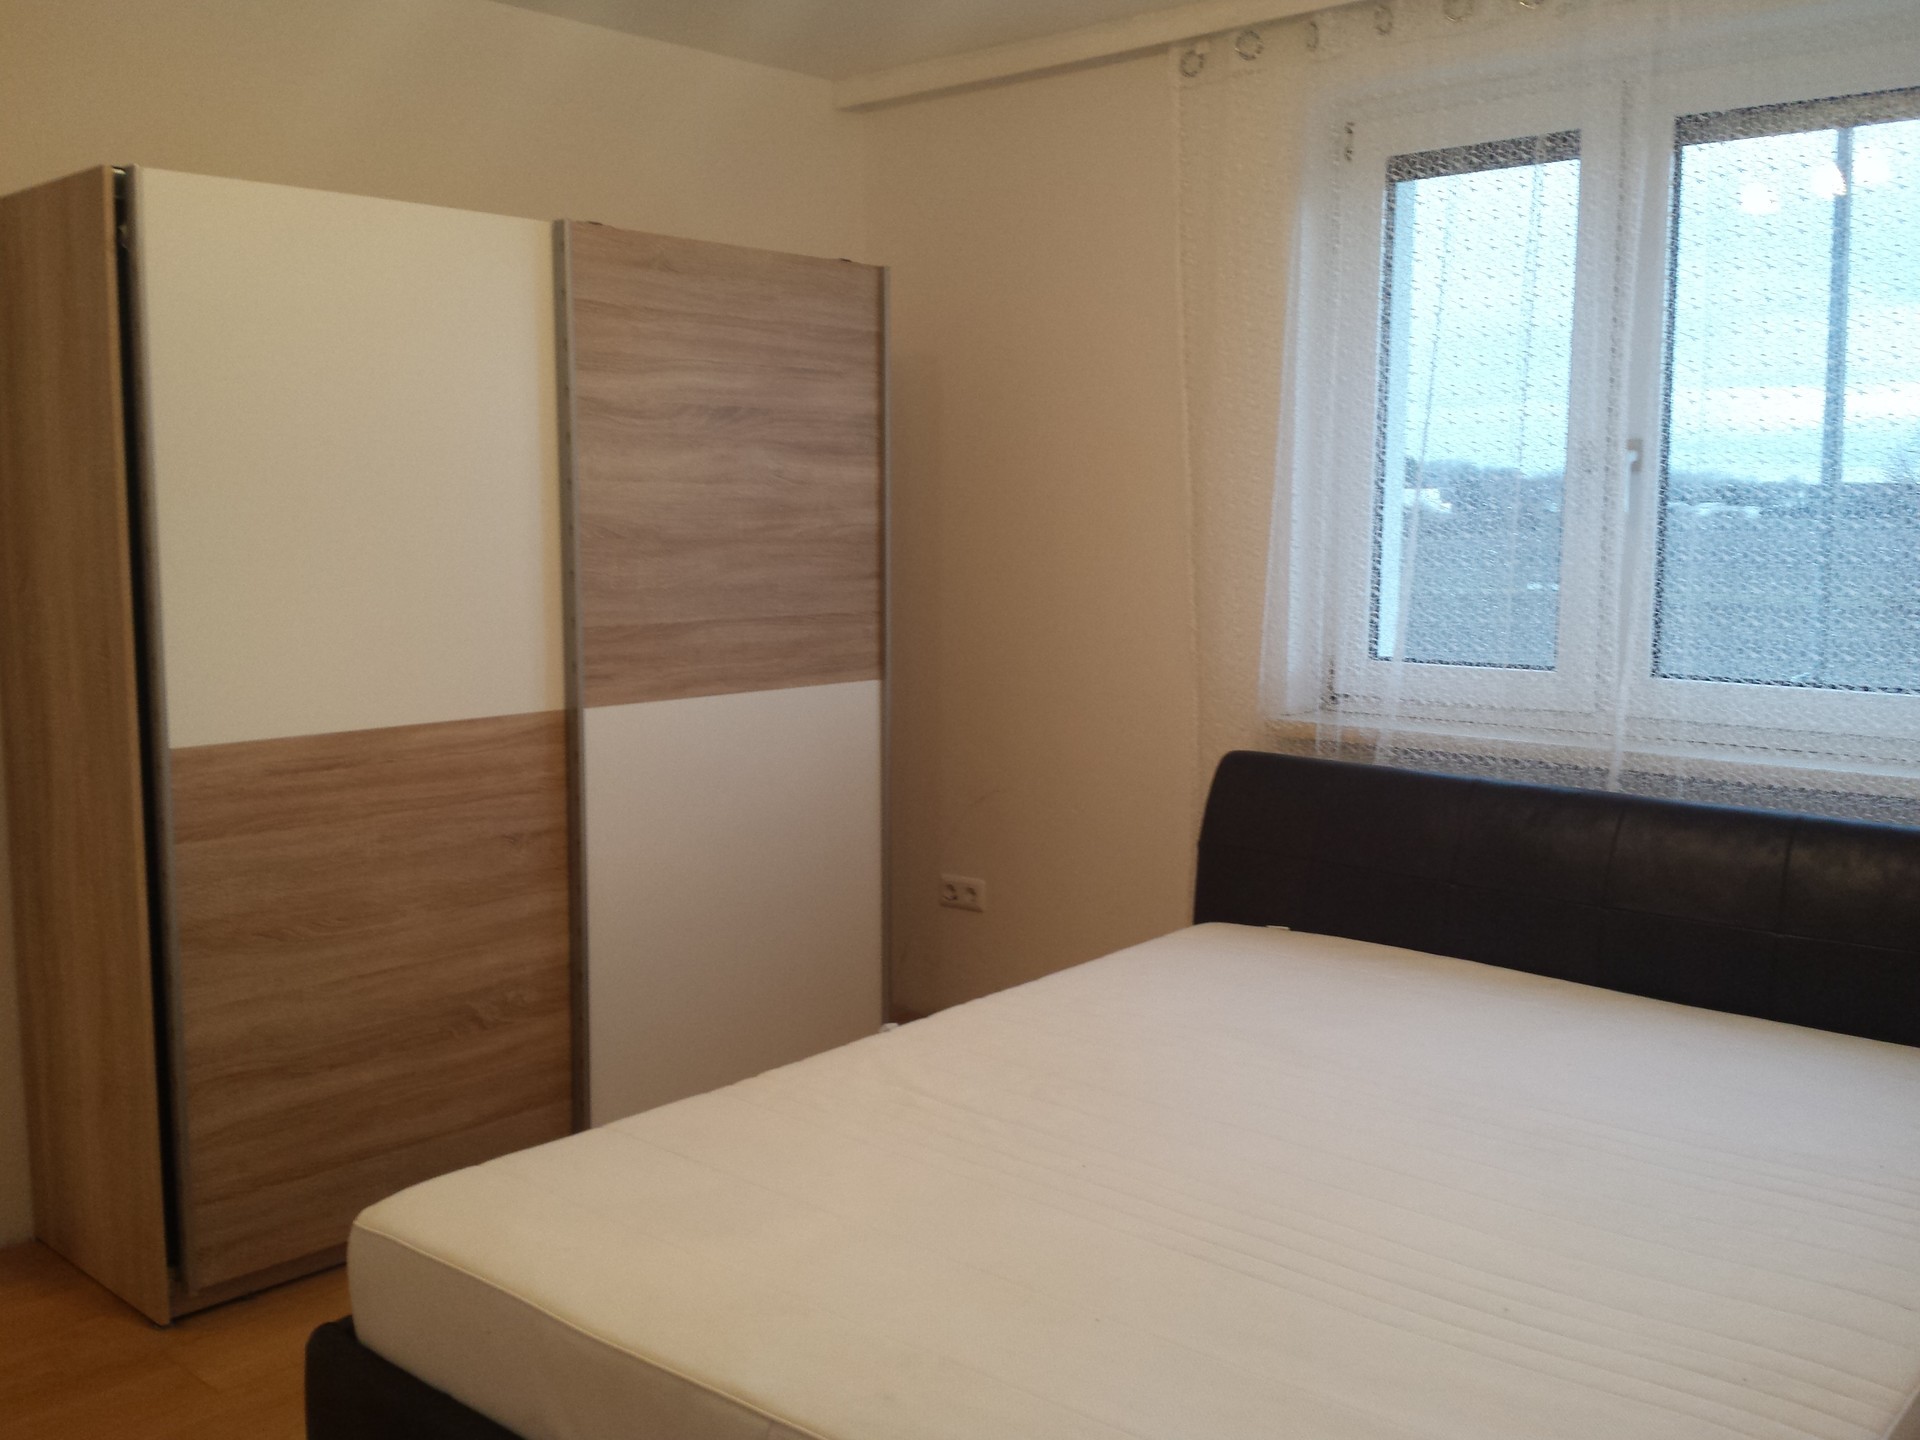 Dazzling 2 bedroom apartment in Zagreb for rent (Students only) | Zagreb apartment for rent 35